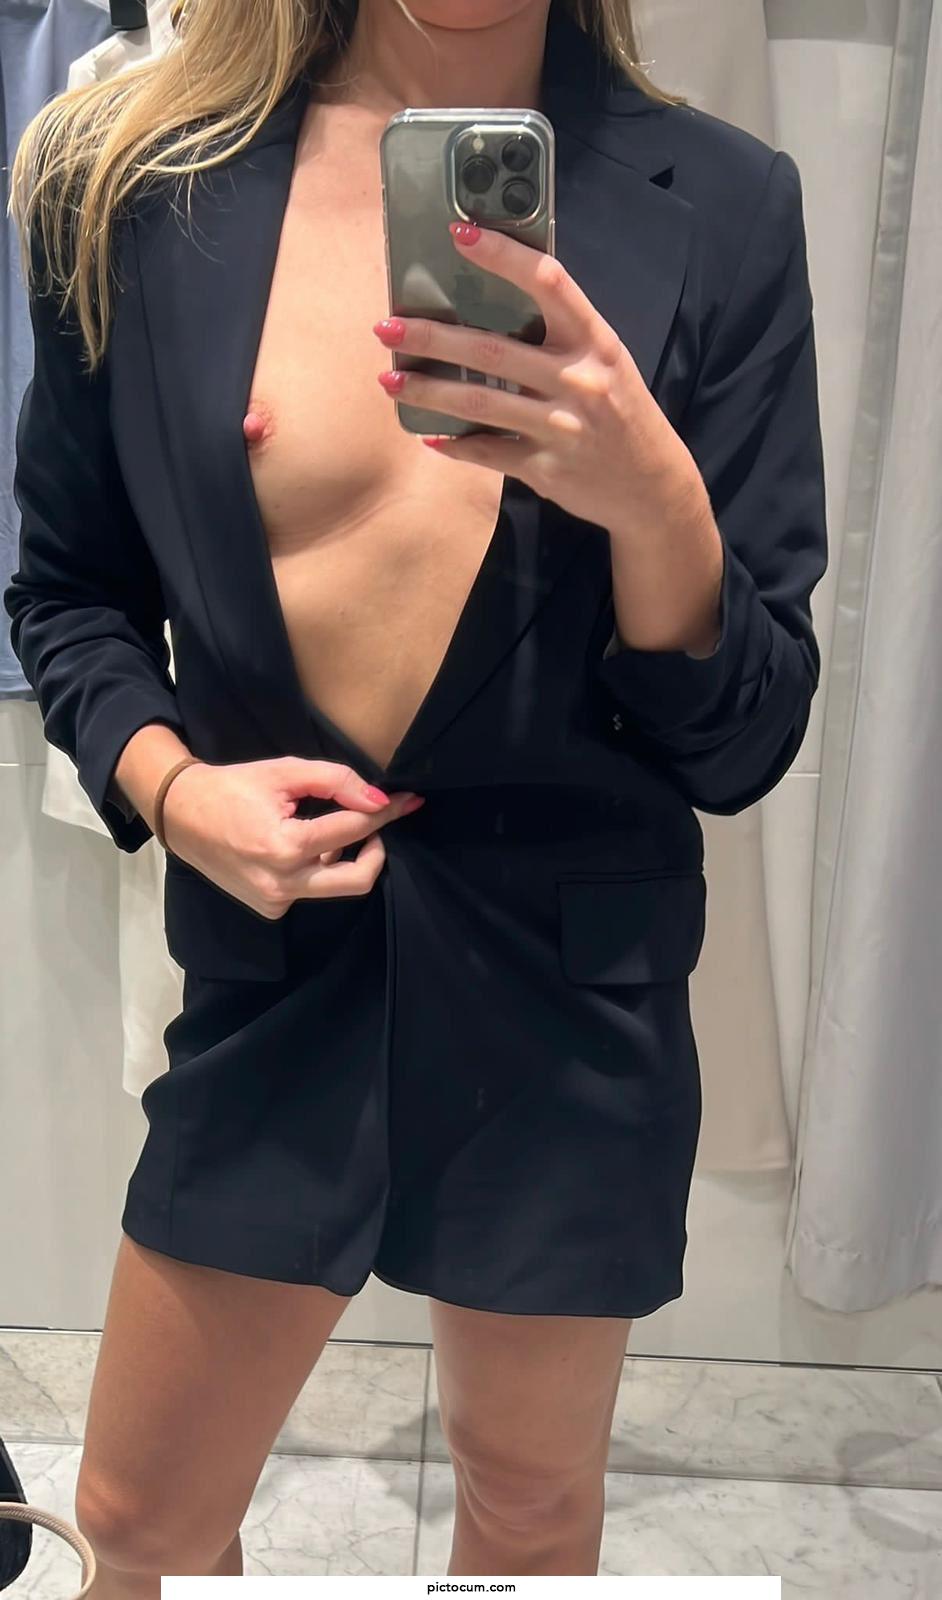 32 MILF, loves to show off in the dressing room